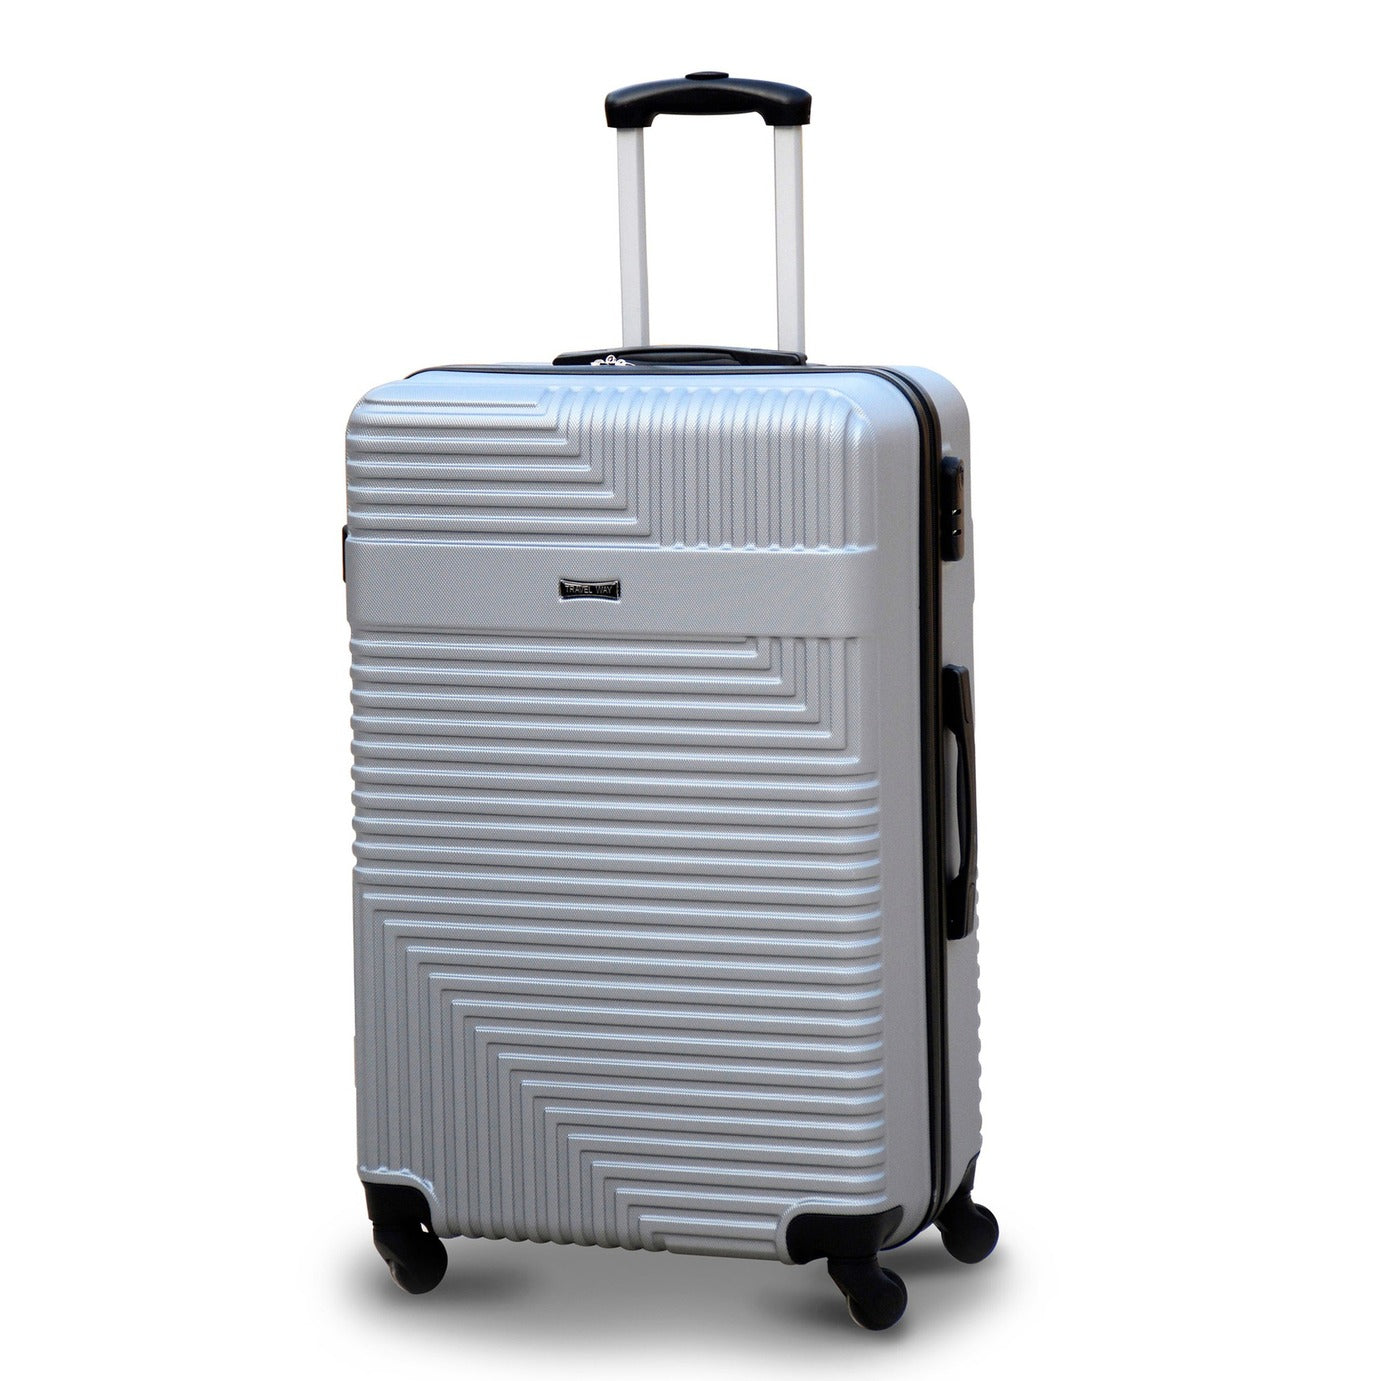 32" Silver Colour Travel Way ABS Luggage Lightweight Hard Case Trolley Bag with Spinner Wheel